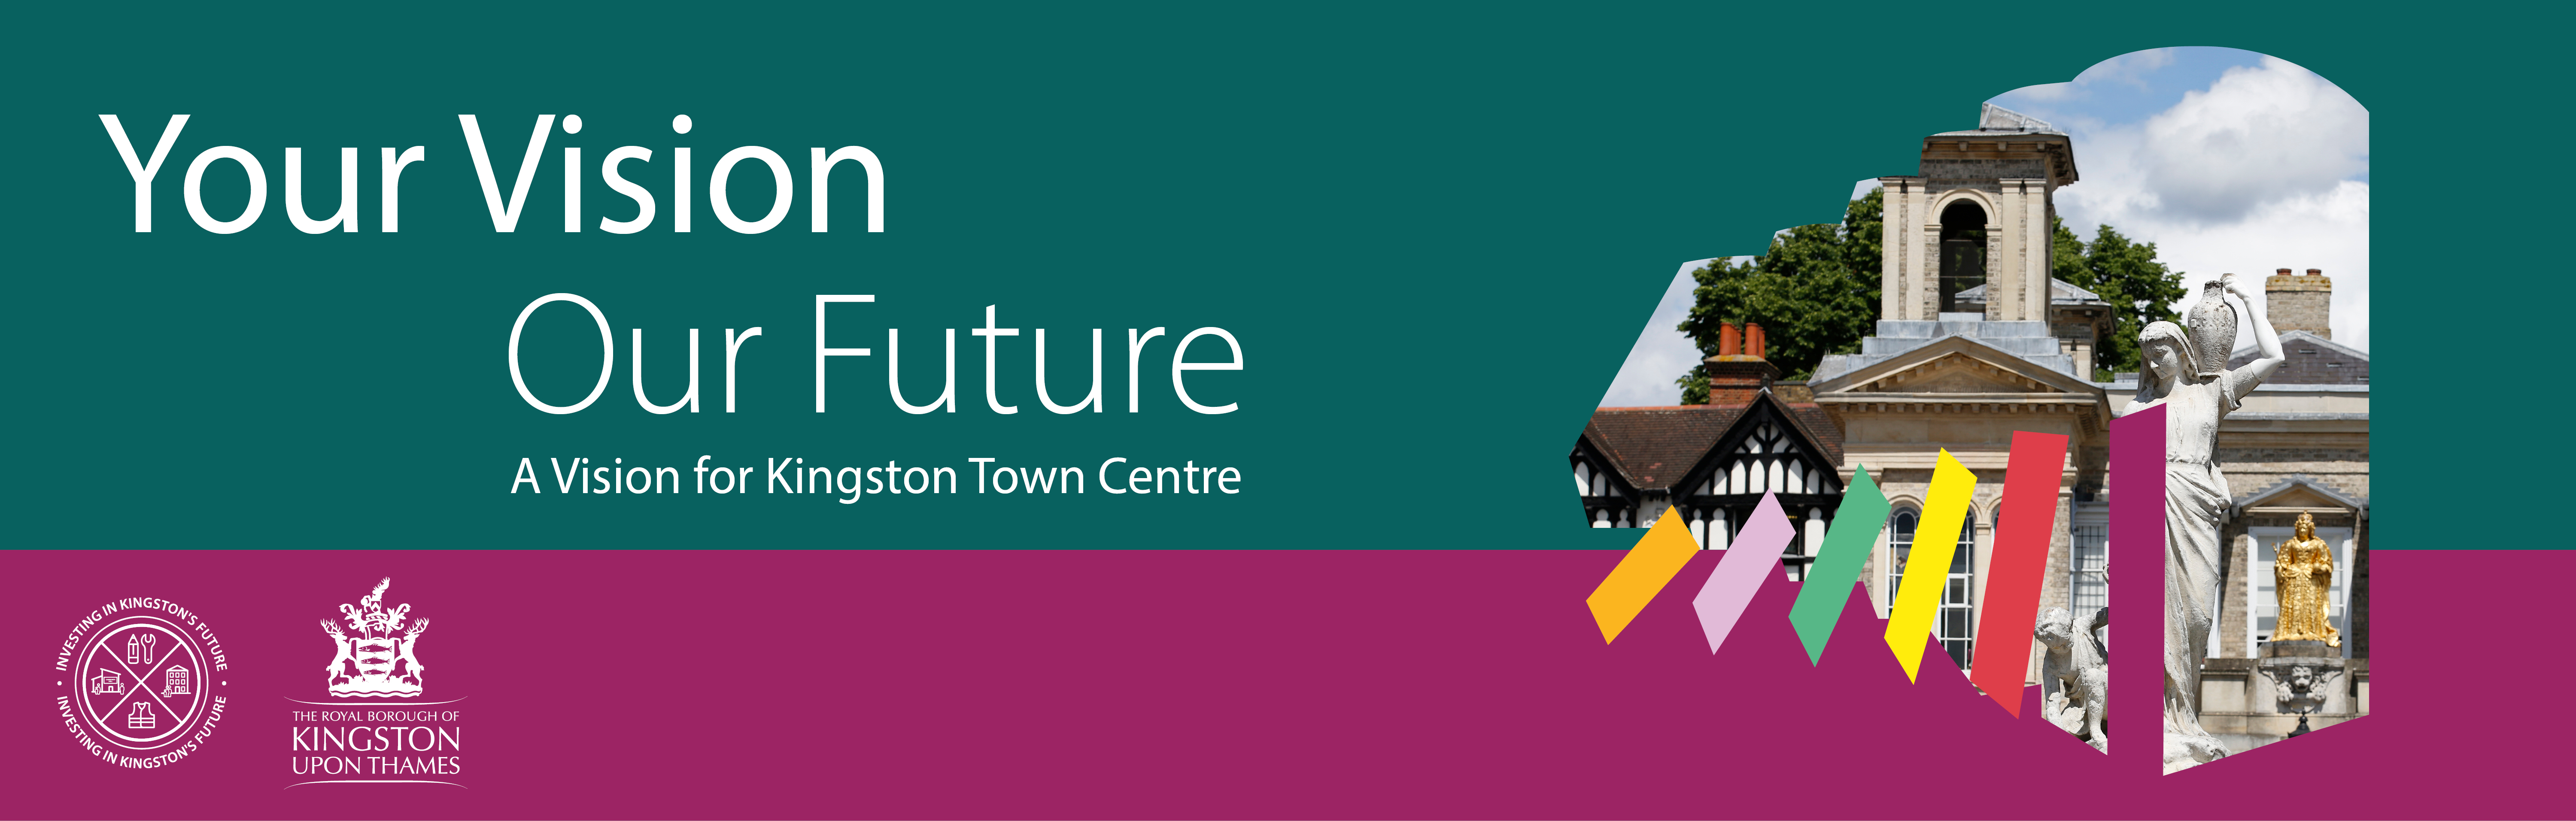 Front page of the document Your Vision Our Future with an image of the Market House